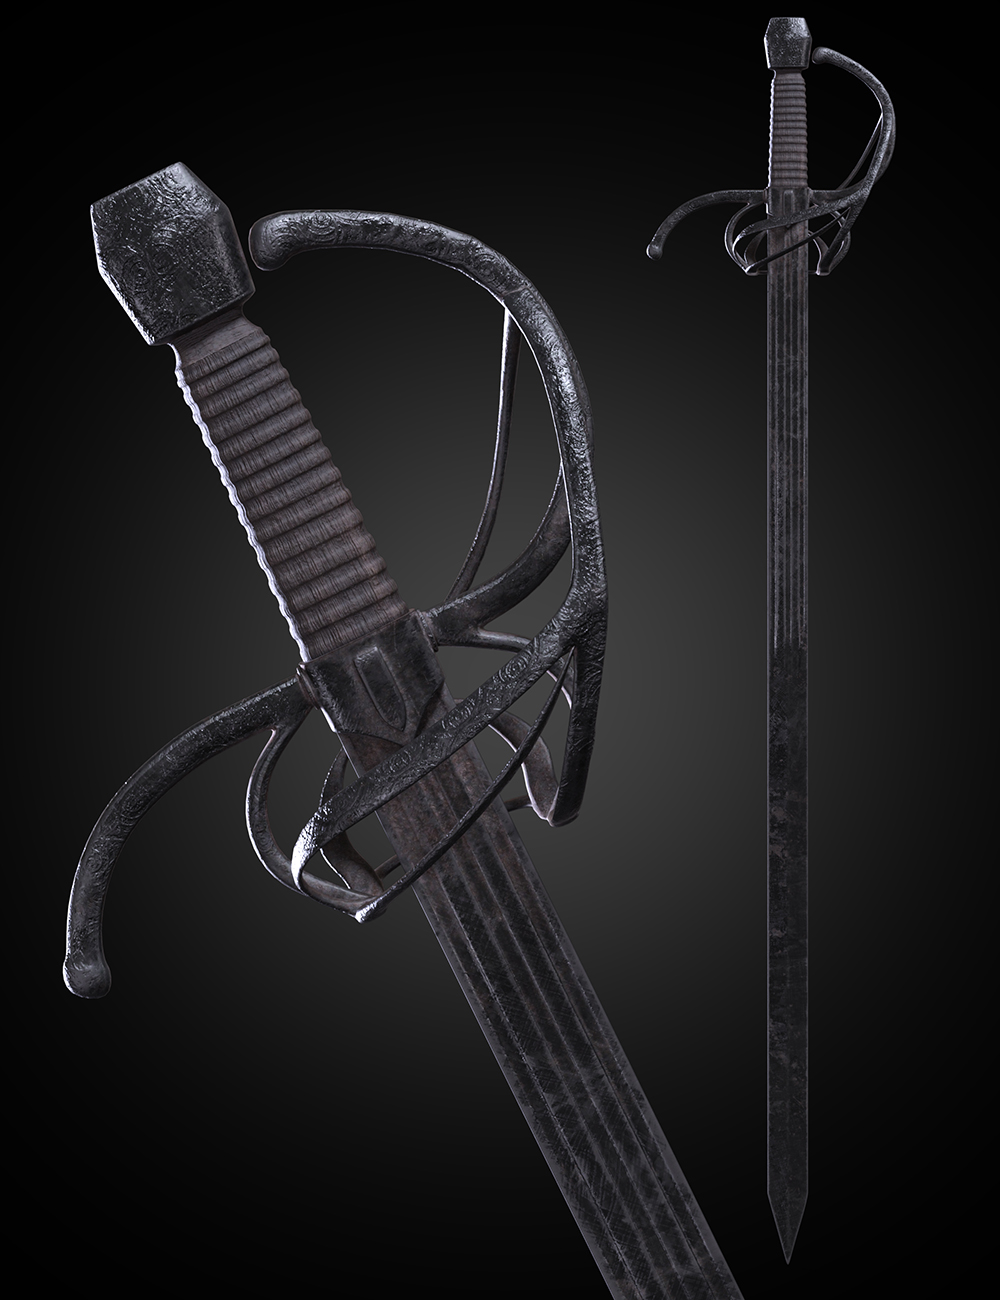 BW Pirate Swords For Genesis 8 and Genesis 8.1 Characters